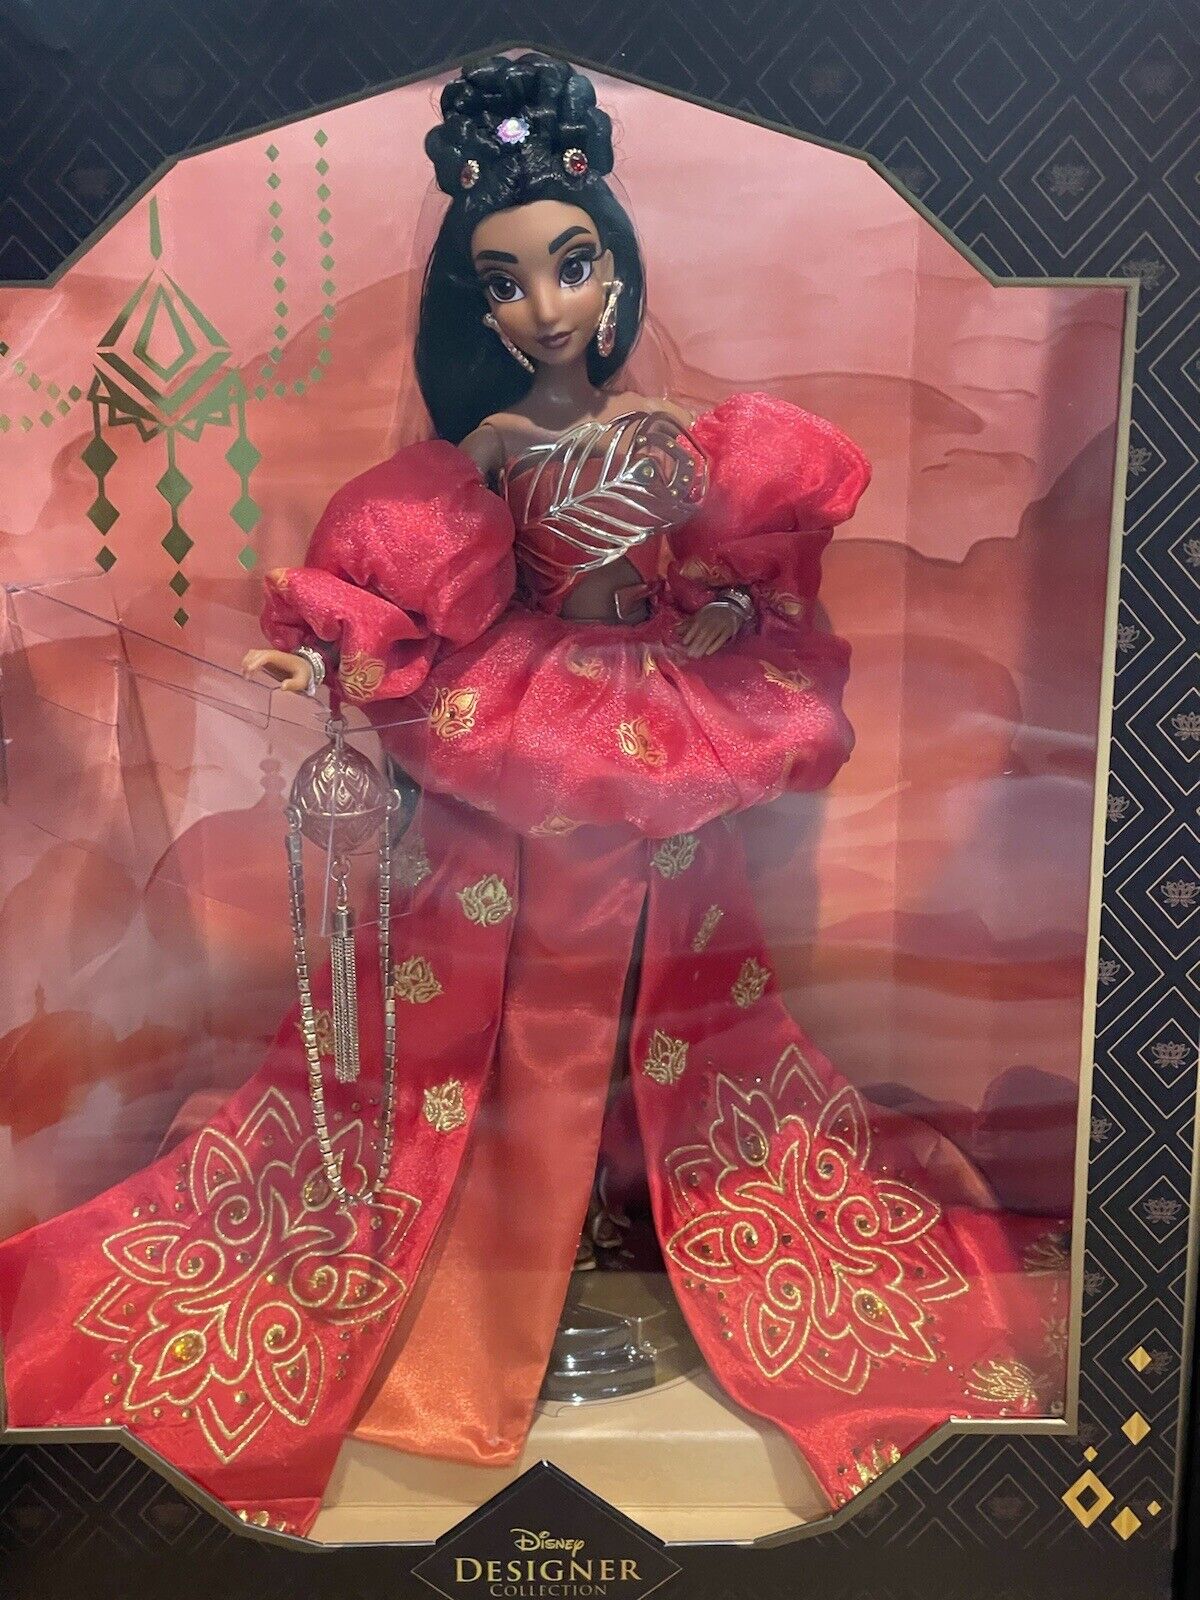 Disney Designer Collection Princess Jasmine Doll 2021 Limited Edition Only 9800